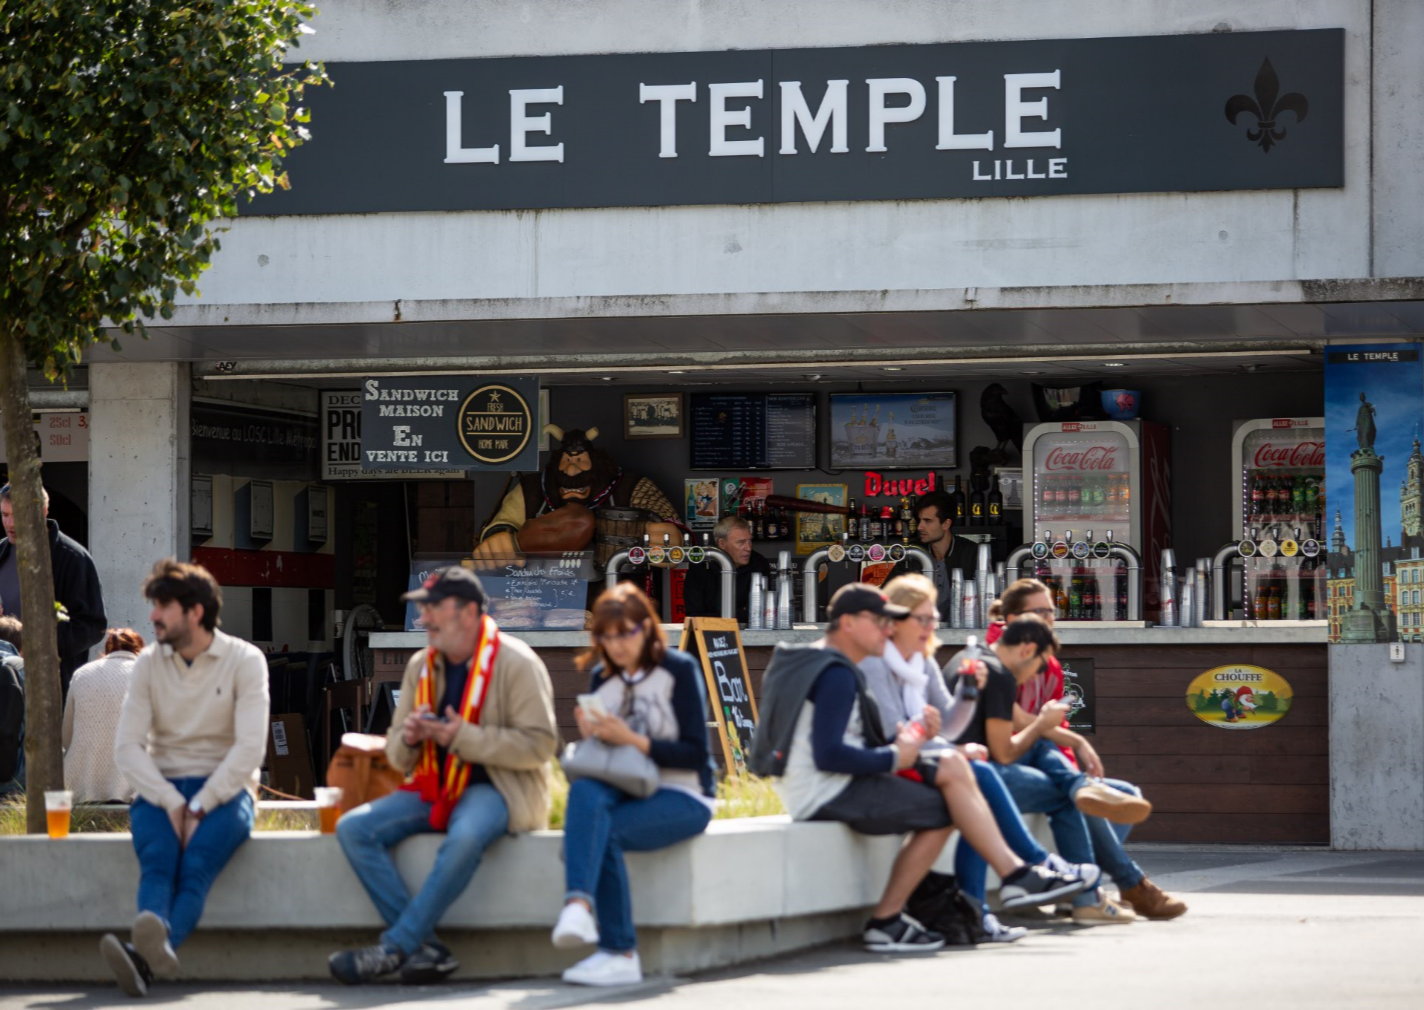 Le Temple - Lille - Stade Pierre Mauroy